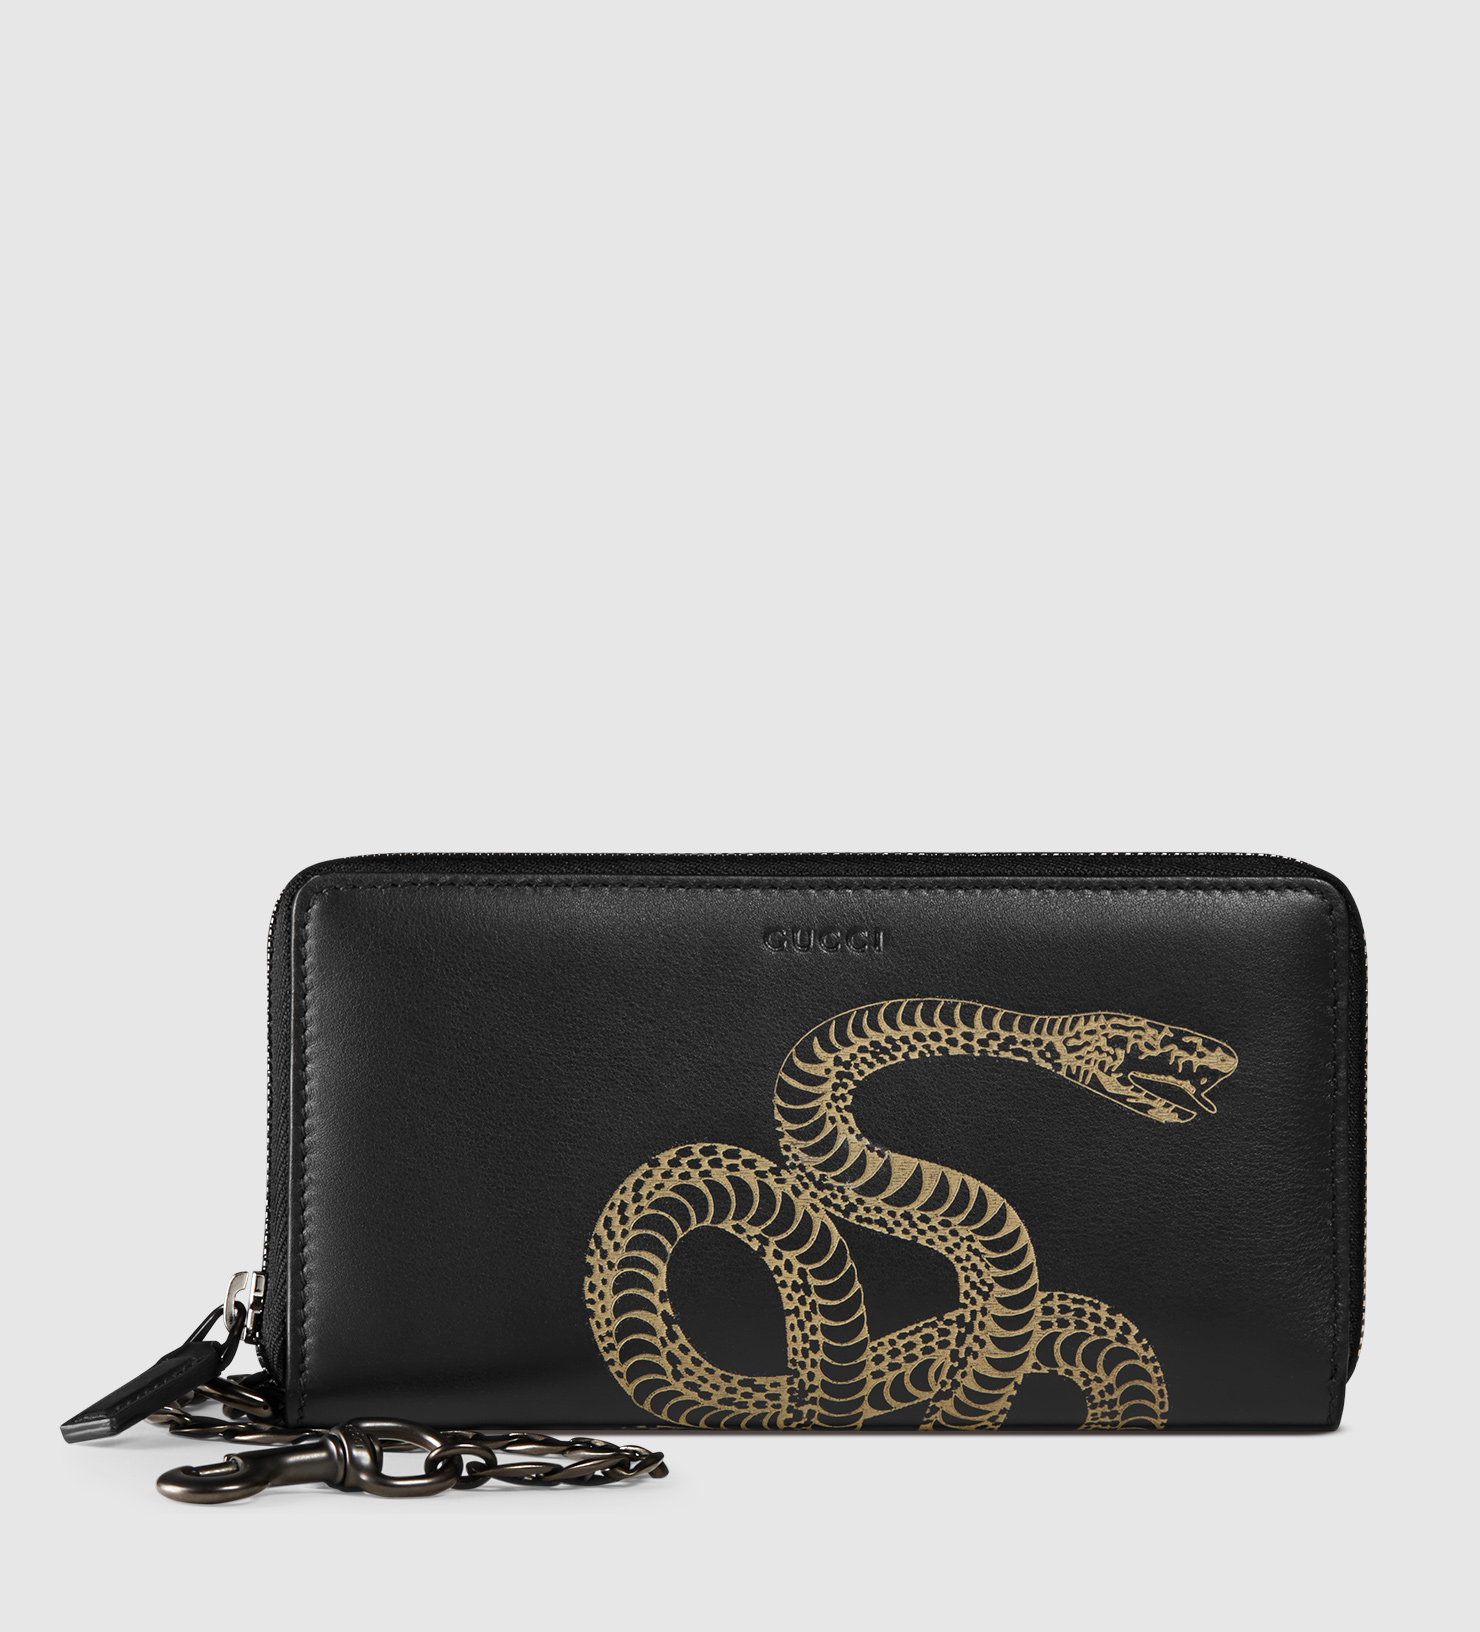 Lyst - Gucci Snake Leather Chain Wallet for Men